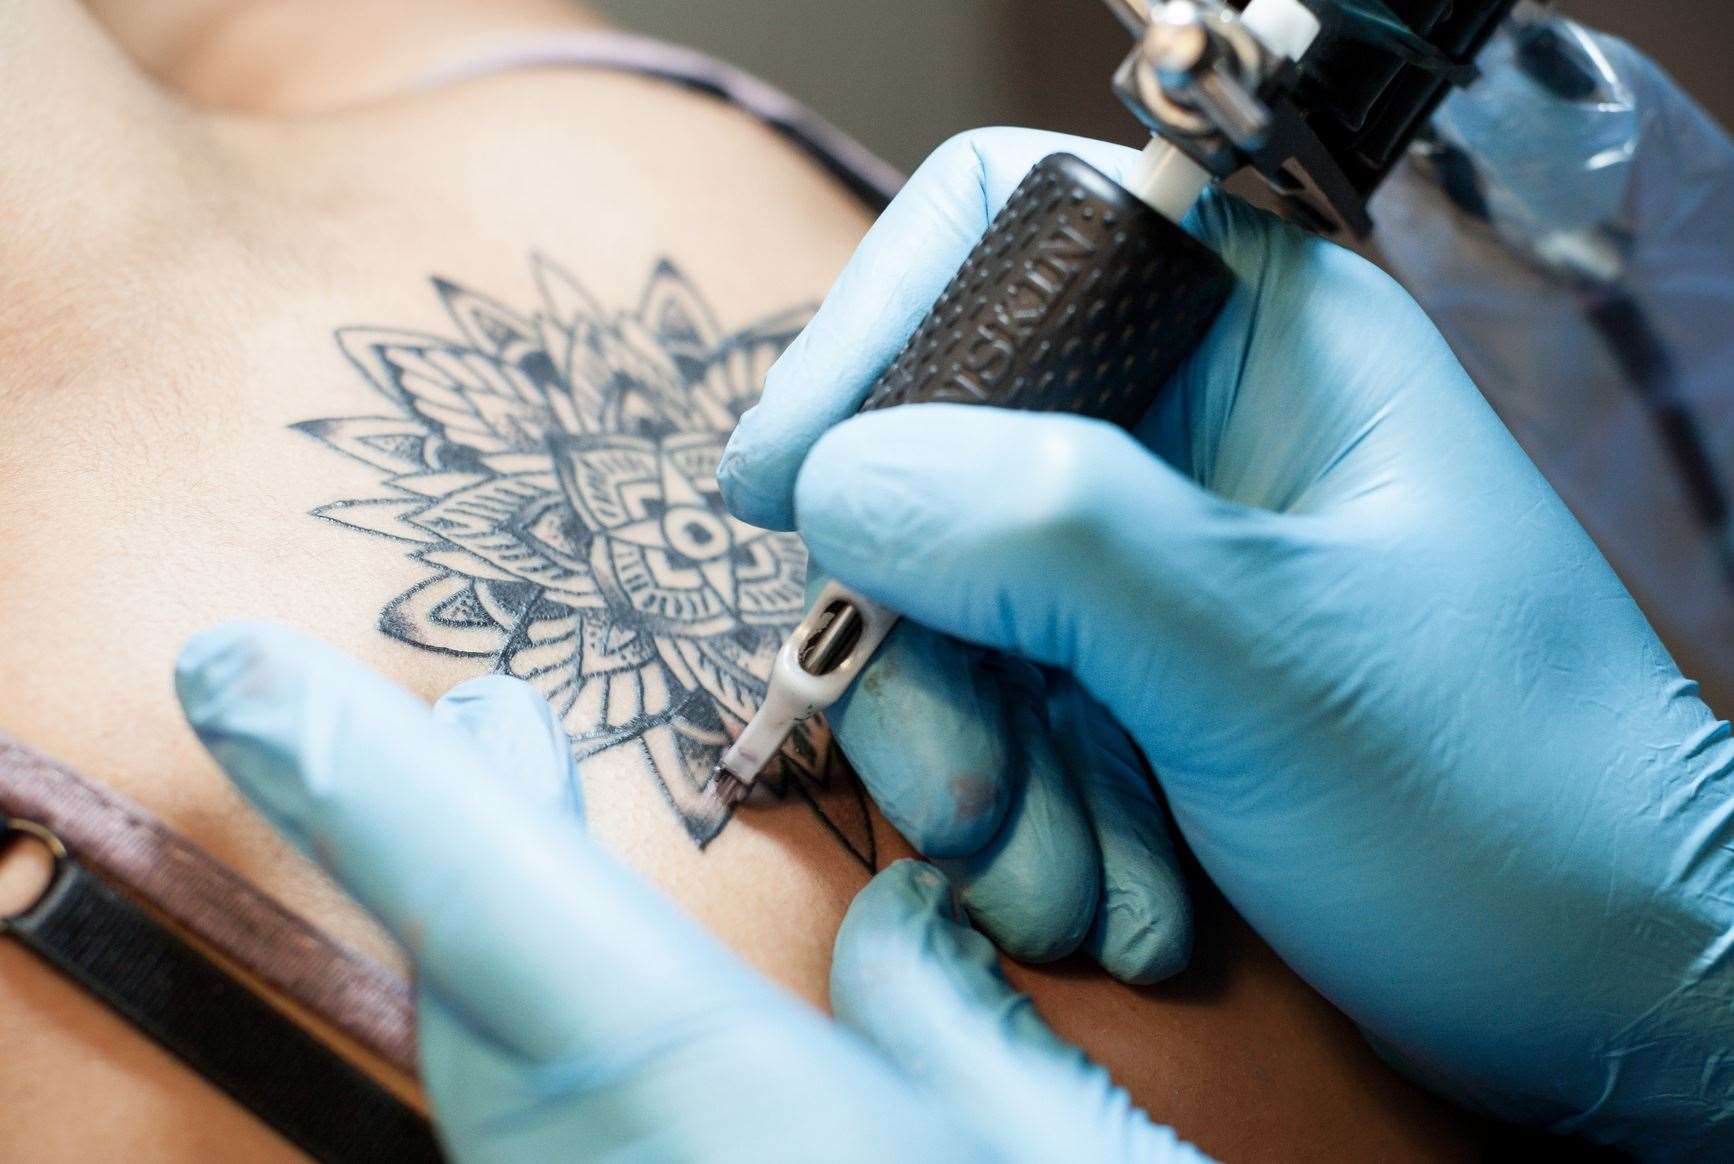 The tattoo had penetrated seven layers of skin and was permanent. Picture: Stock image.